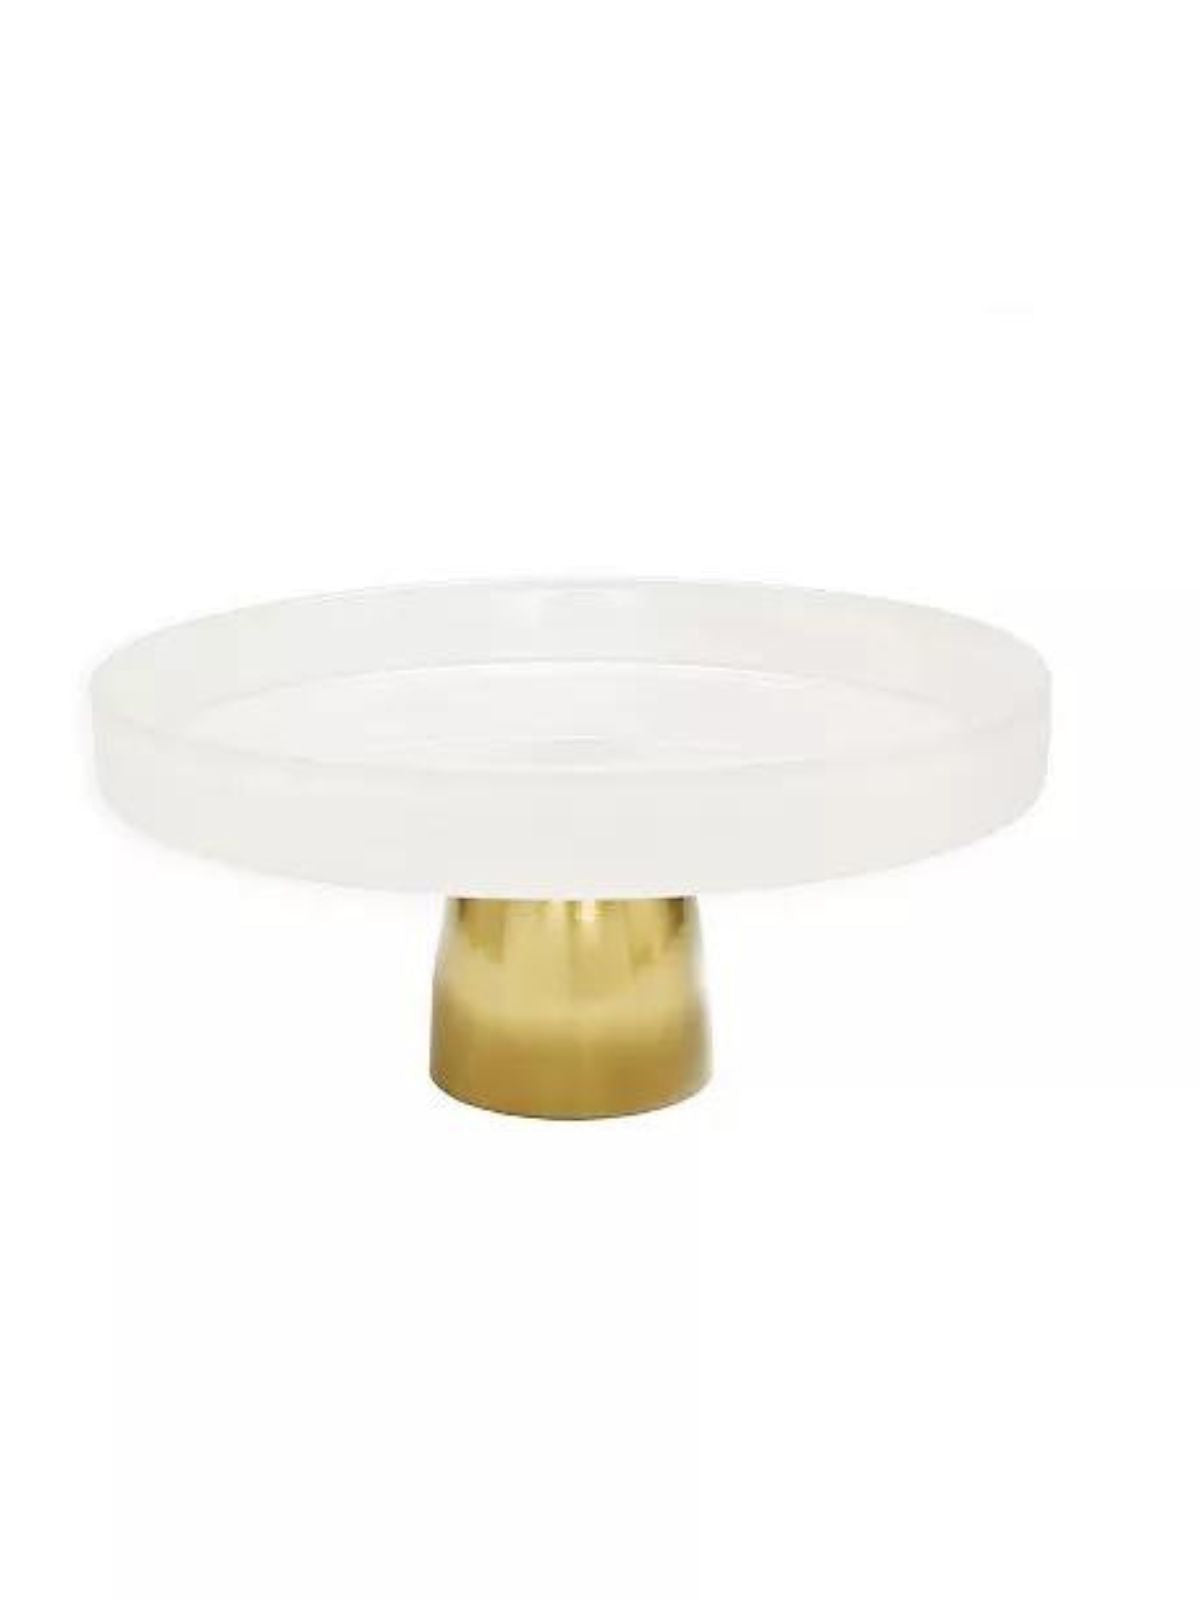 White Glass Cake Stand on Gold Base, 9.5D x 4.5H.